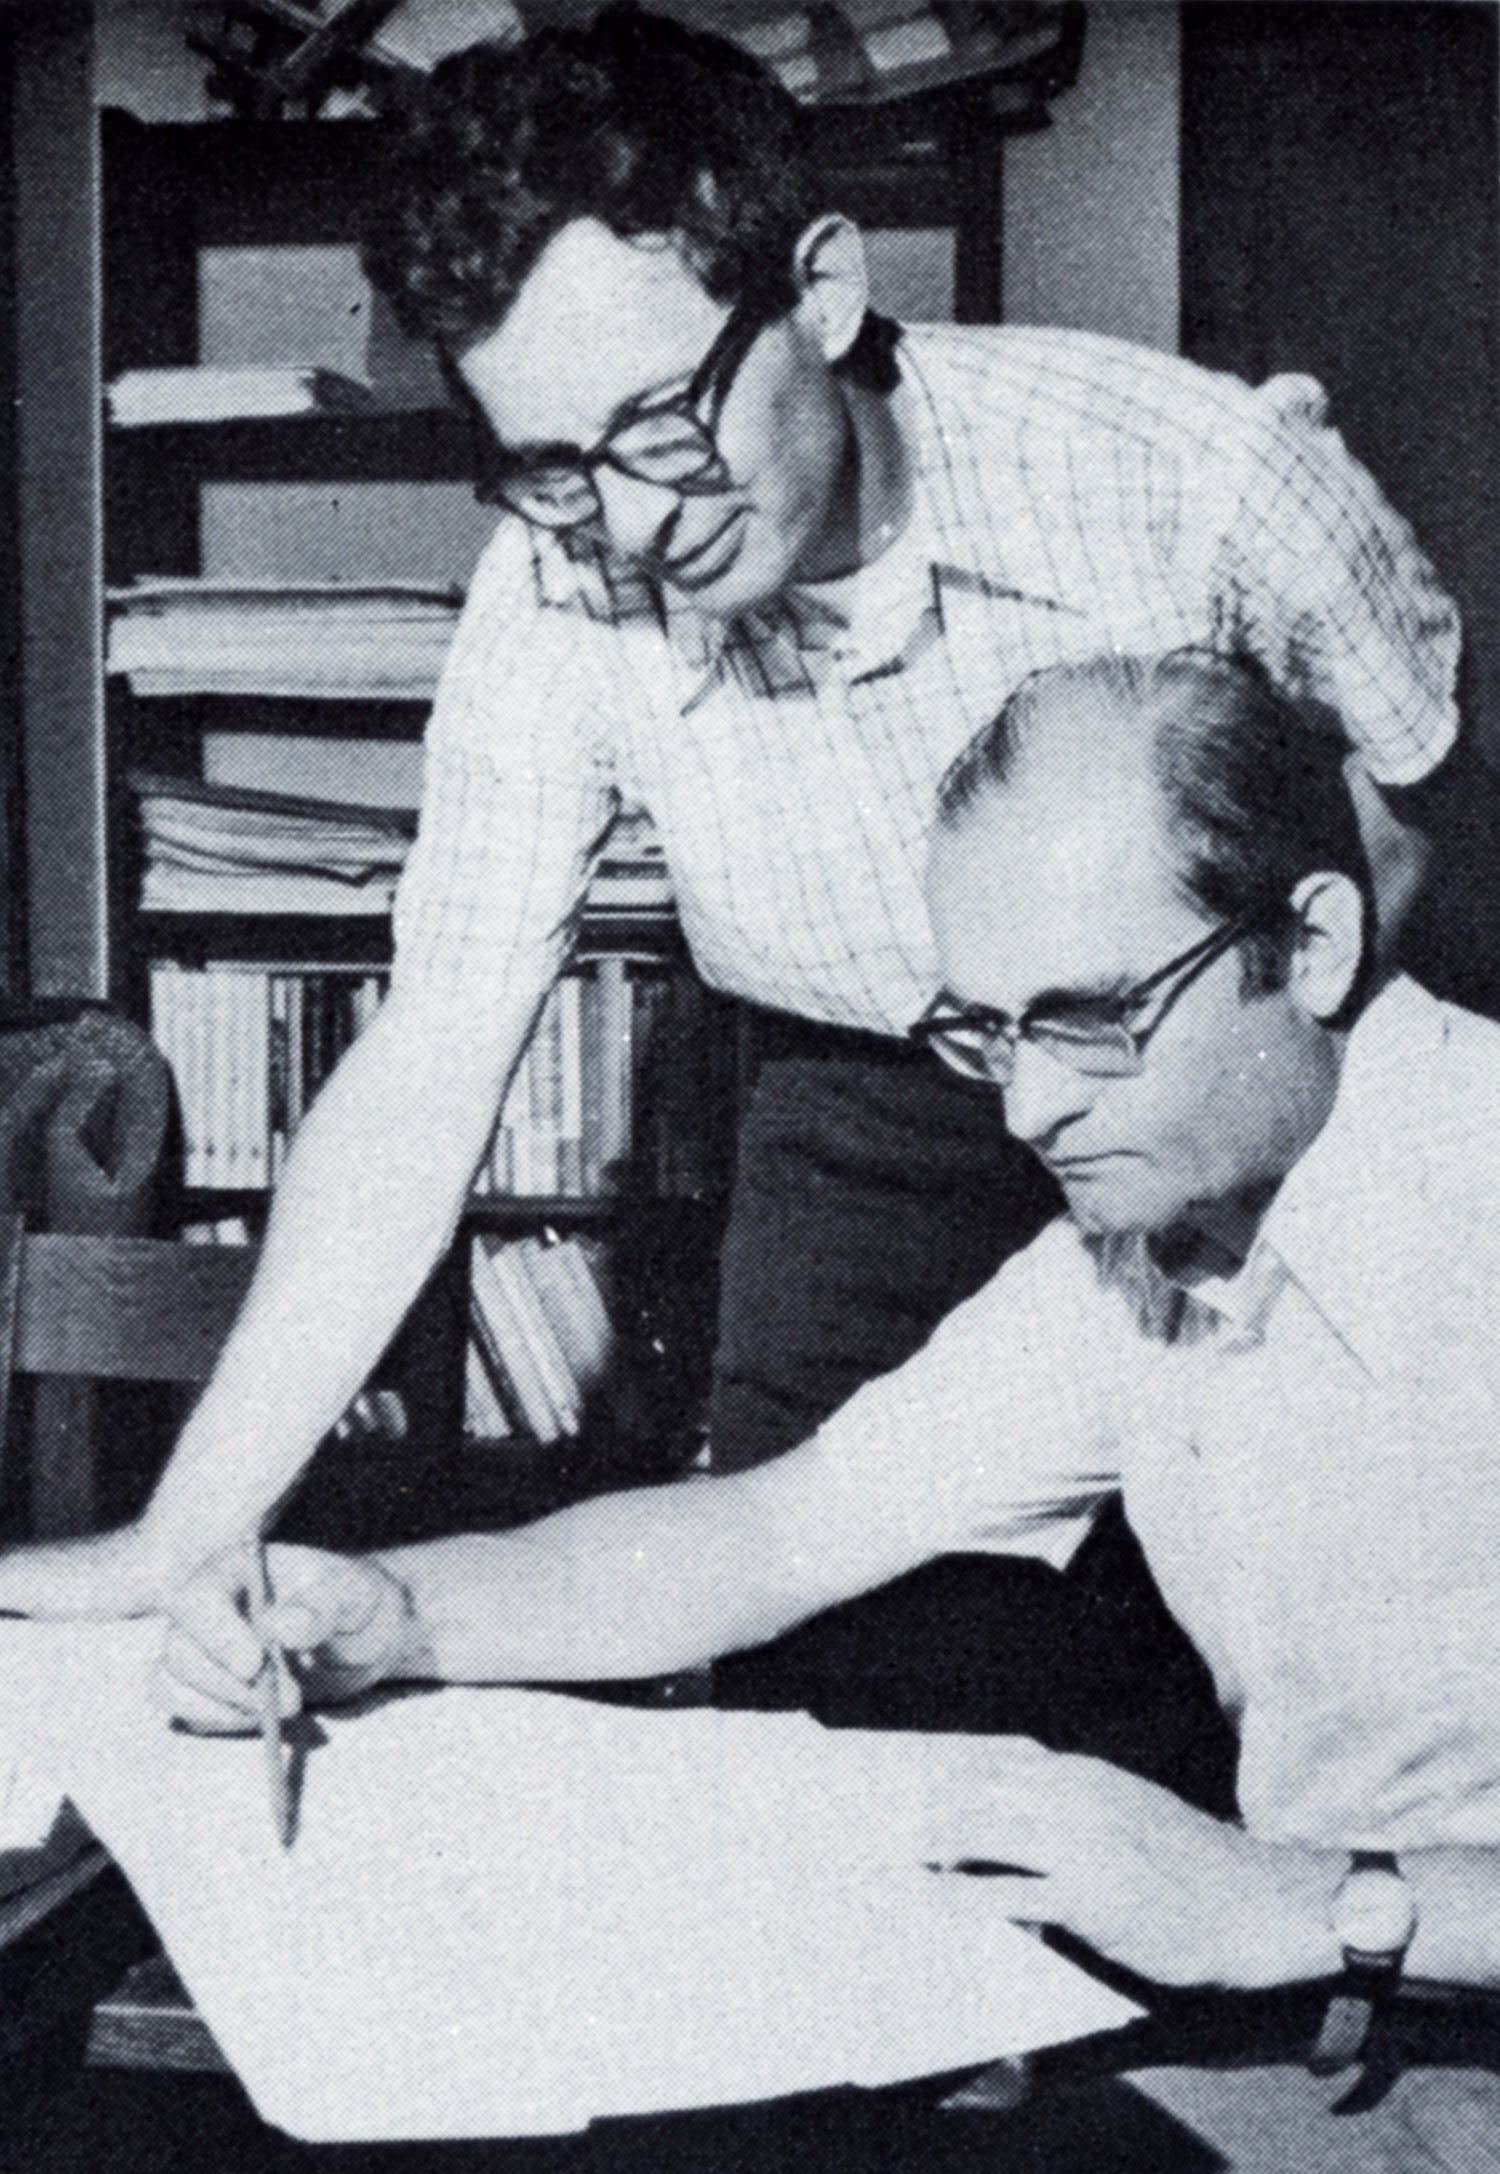 Kenneth Appel and Wolfgang Haken (seated) solve the Four Color Problem which was remarkable both for its mathematical and historical significance as the solution to a long-standing problem with an extremely simple formulation, and also for the method of proof which made extensive use of computing technology--making it the first mathematical proof to rely in an essential fashion on the use of computers.